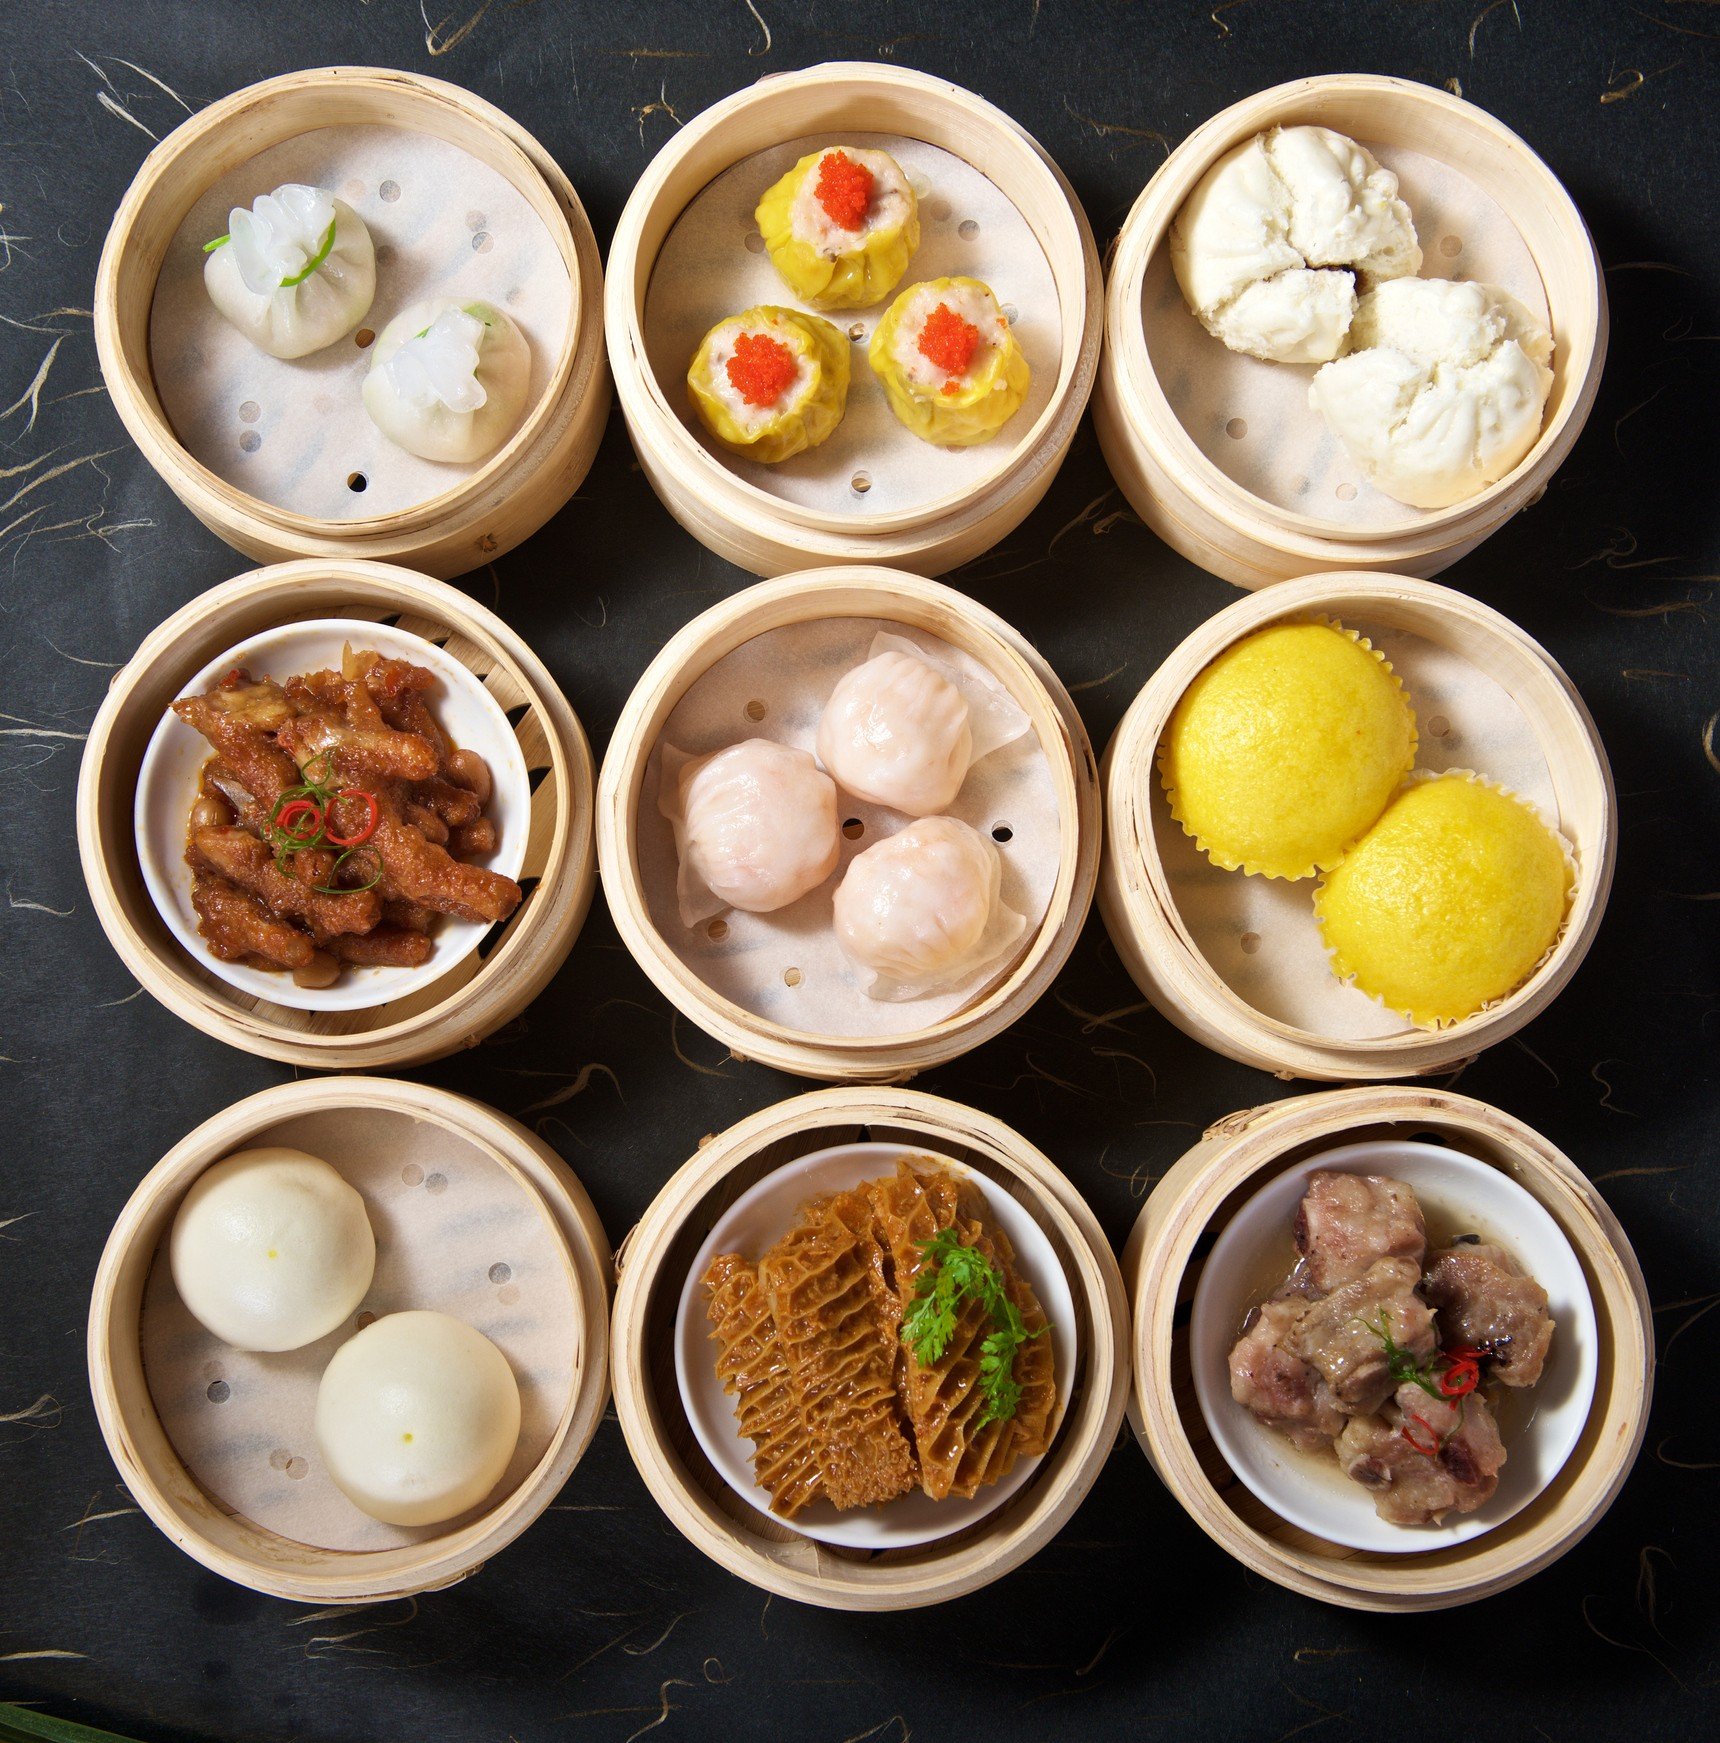 Many dim sum dishes are calorie dense, and high in fat and sodium, which could be contributors to increased risk of heart disease.